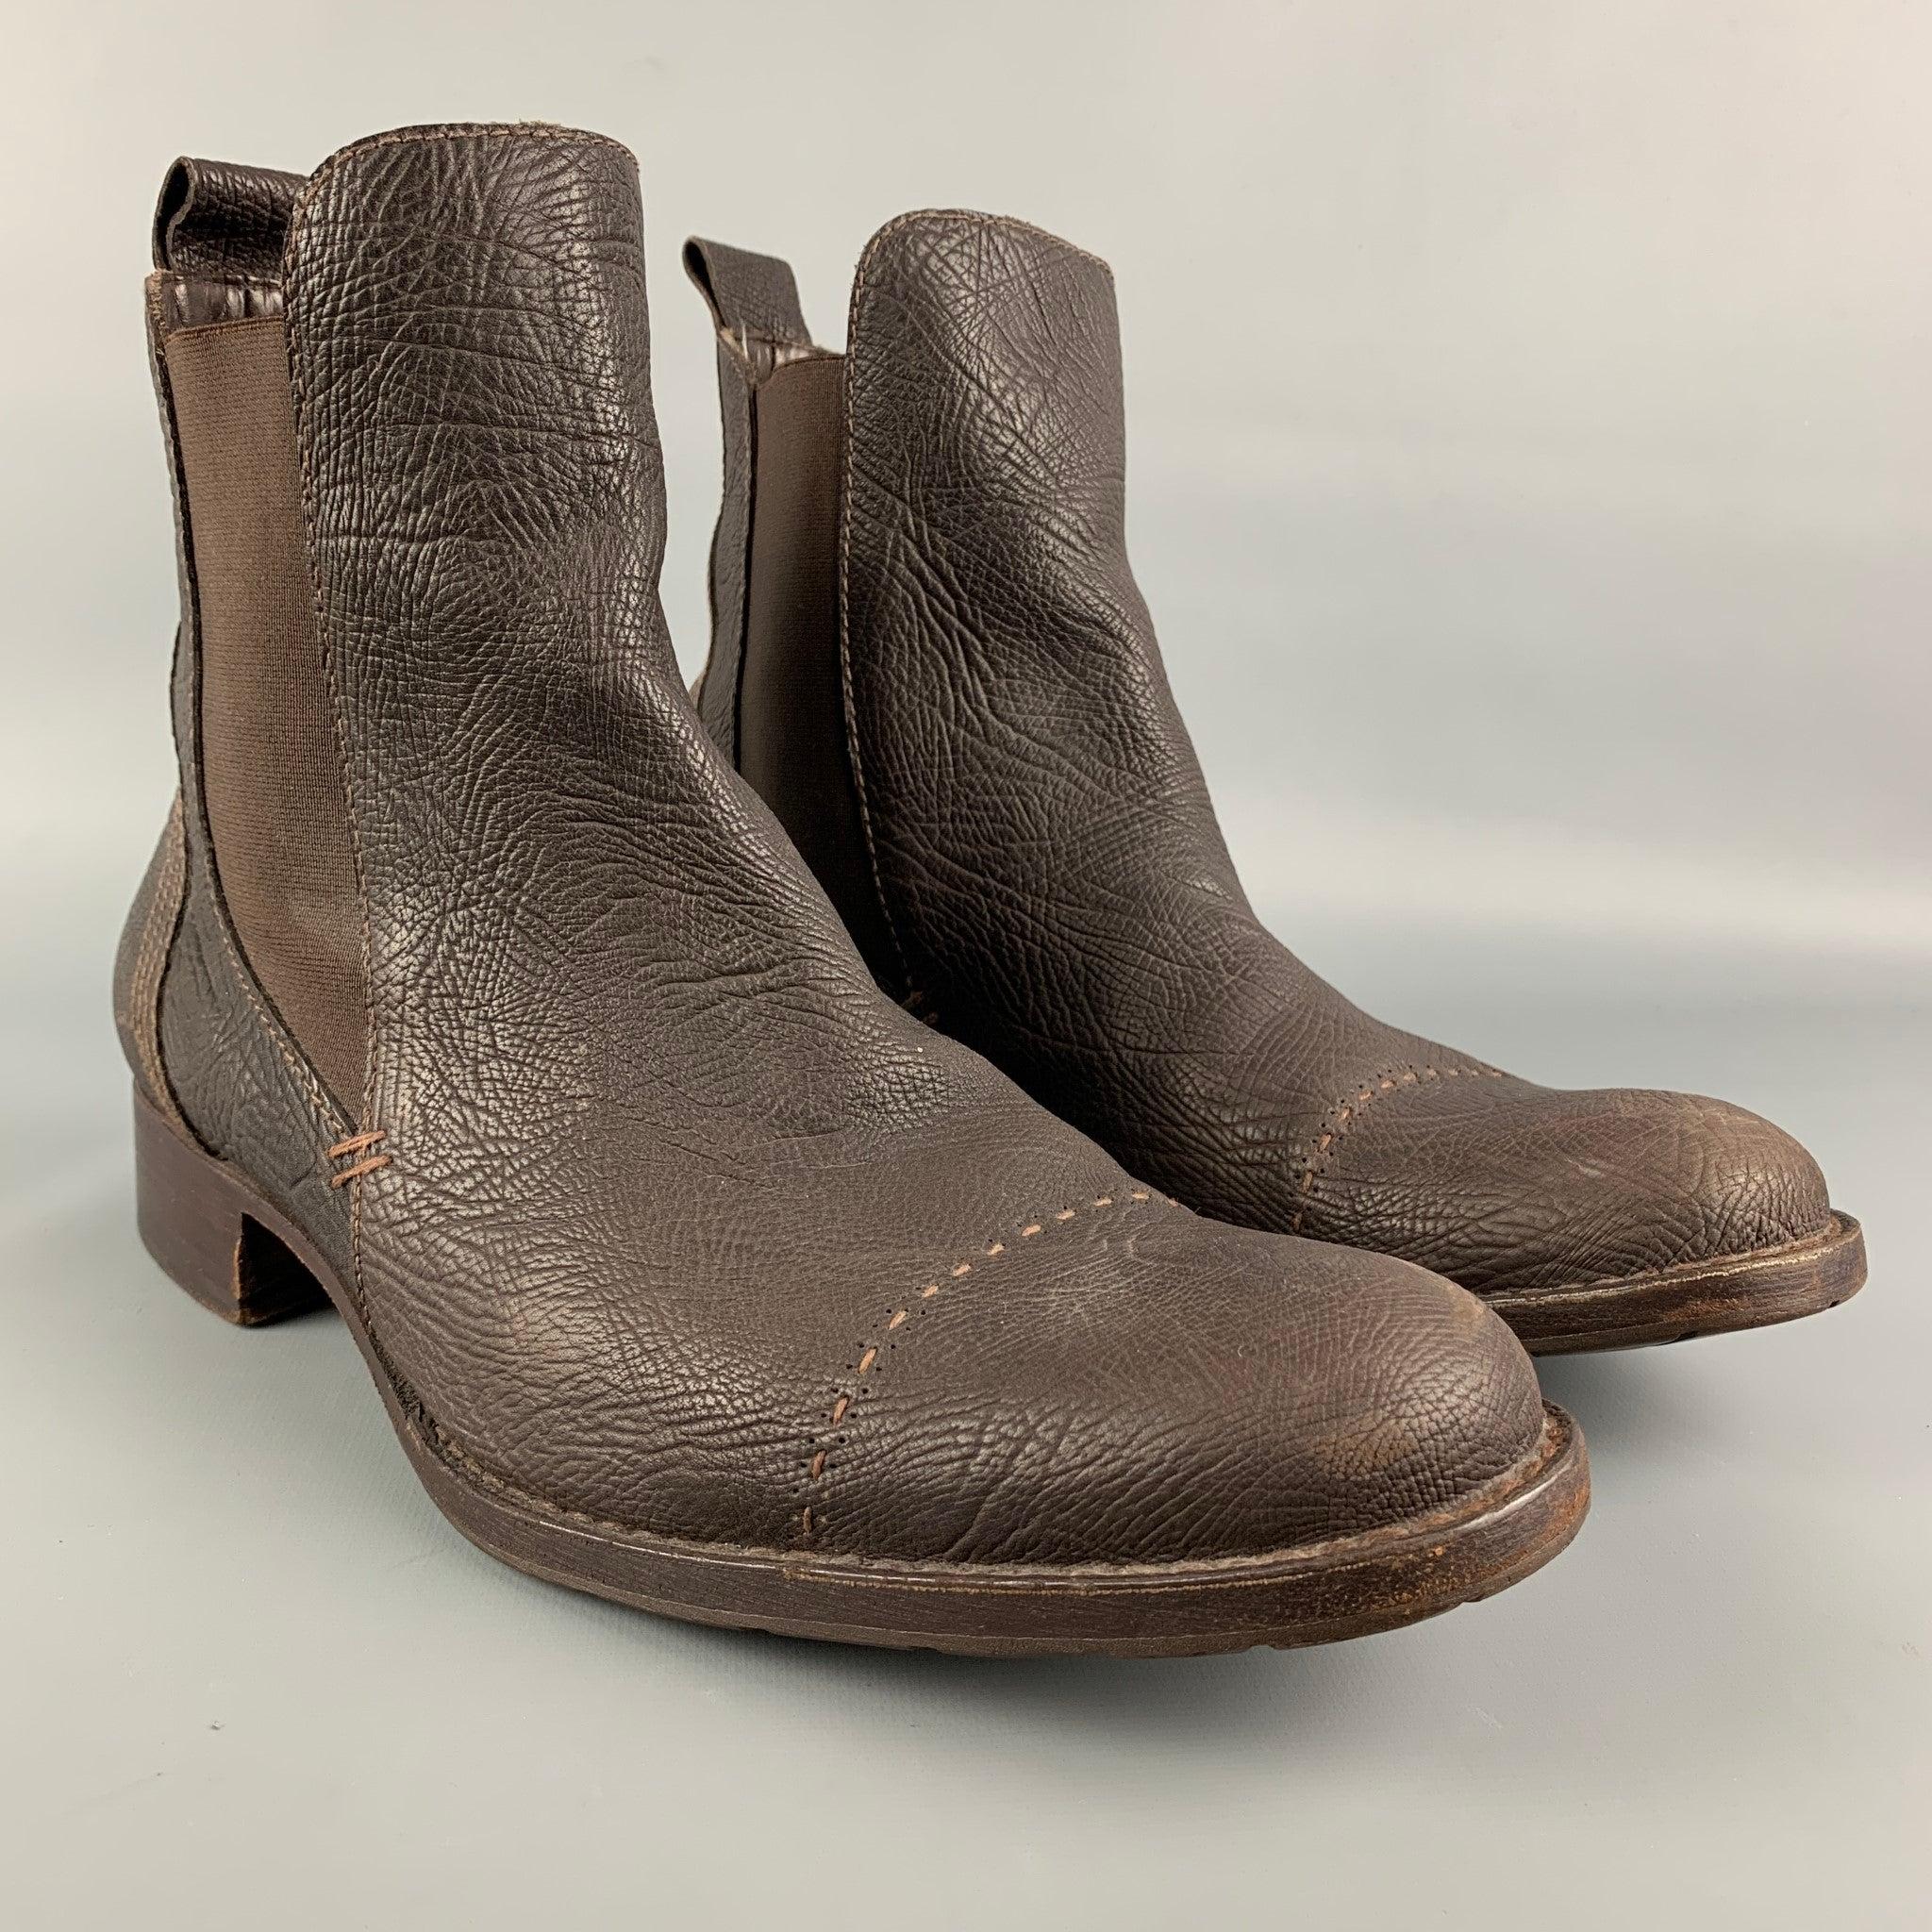 HENRY BEGUELIN boots comes in a brown leather featuring a chelsea style, contrast stitching, cap toe, and a wooden sole. Made in Italy.Good
Pre-Owned Condition. 

Marked:   43 

Measurements: 
  Length: 12 inches  Width: 4 inches  Height: 6.5 inches